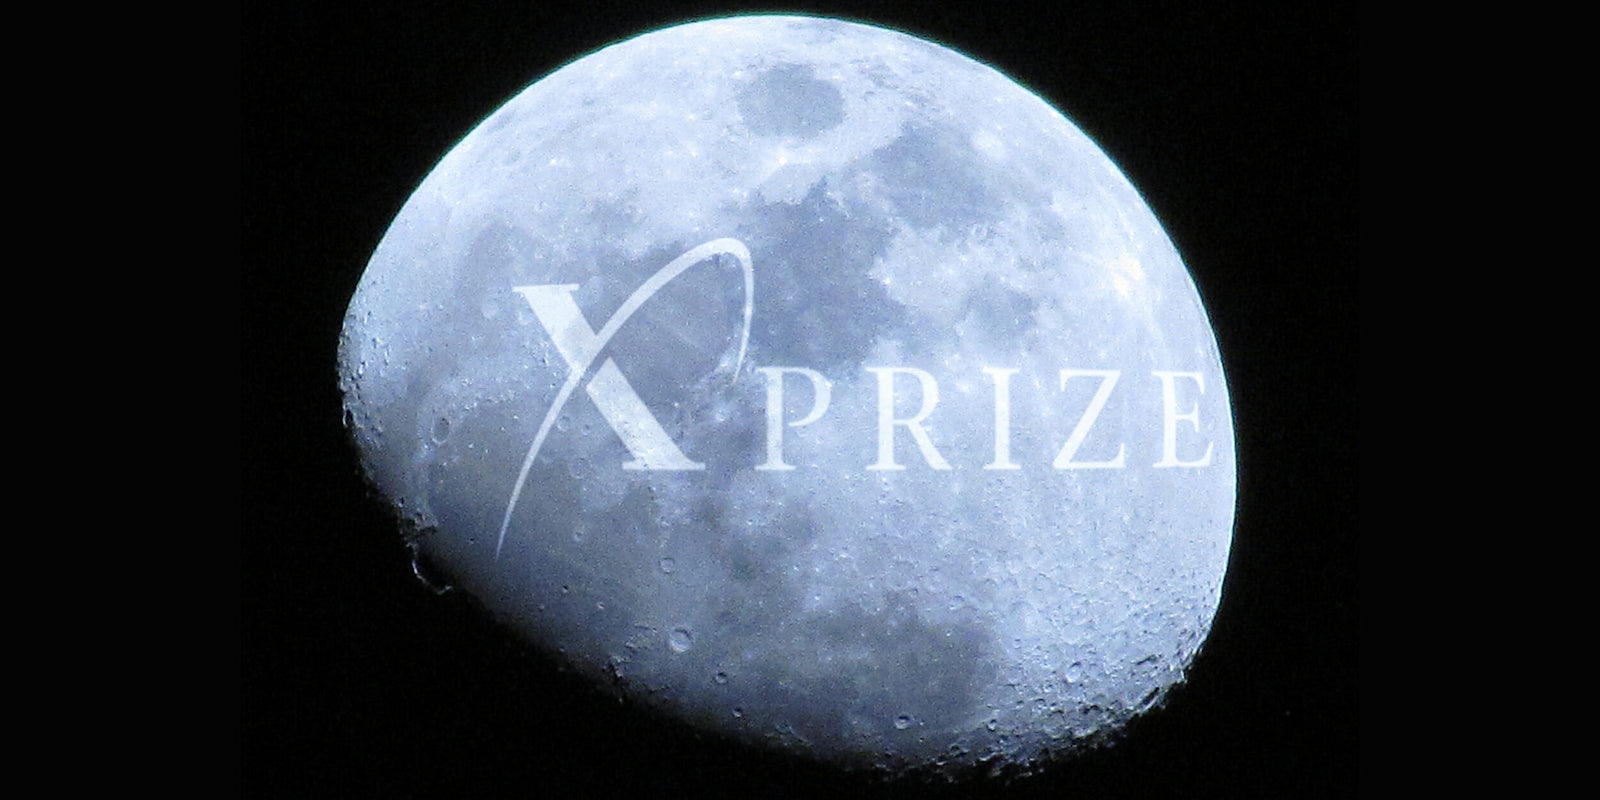 Moon with Xprize logo